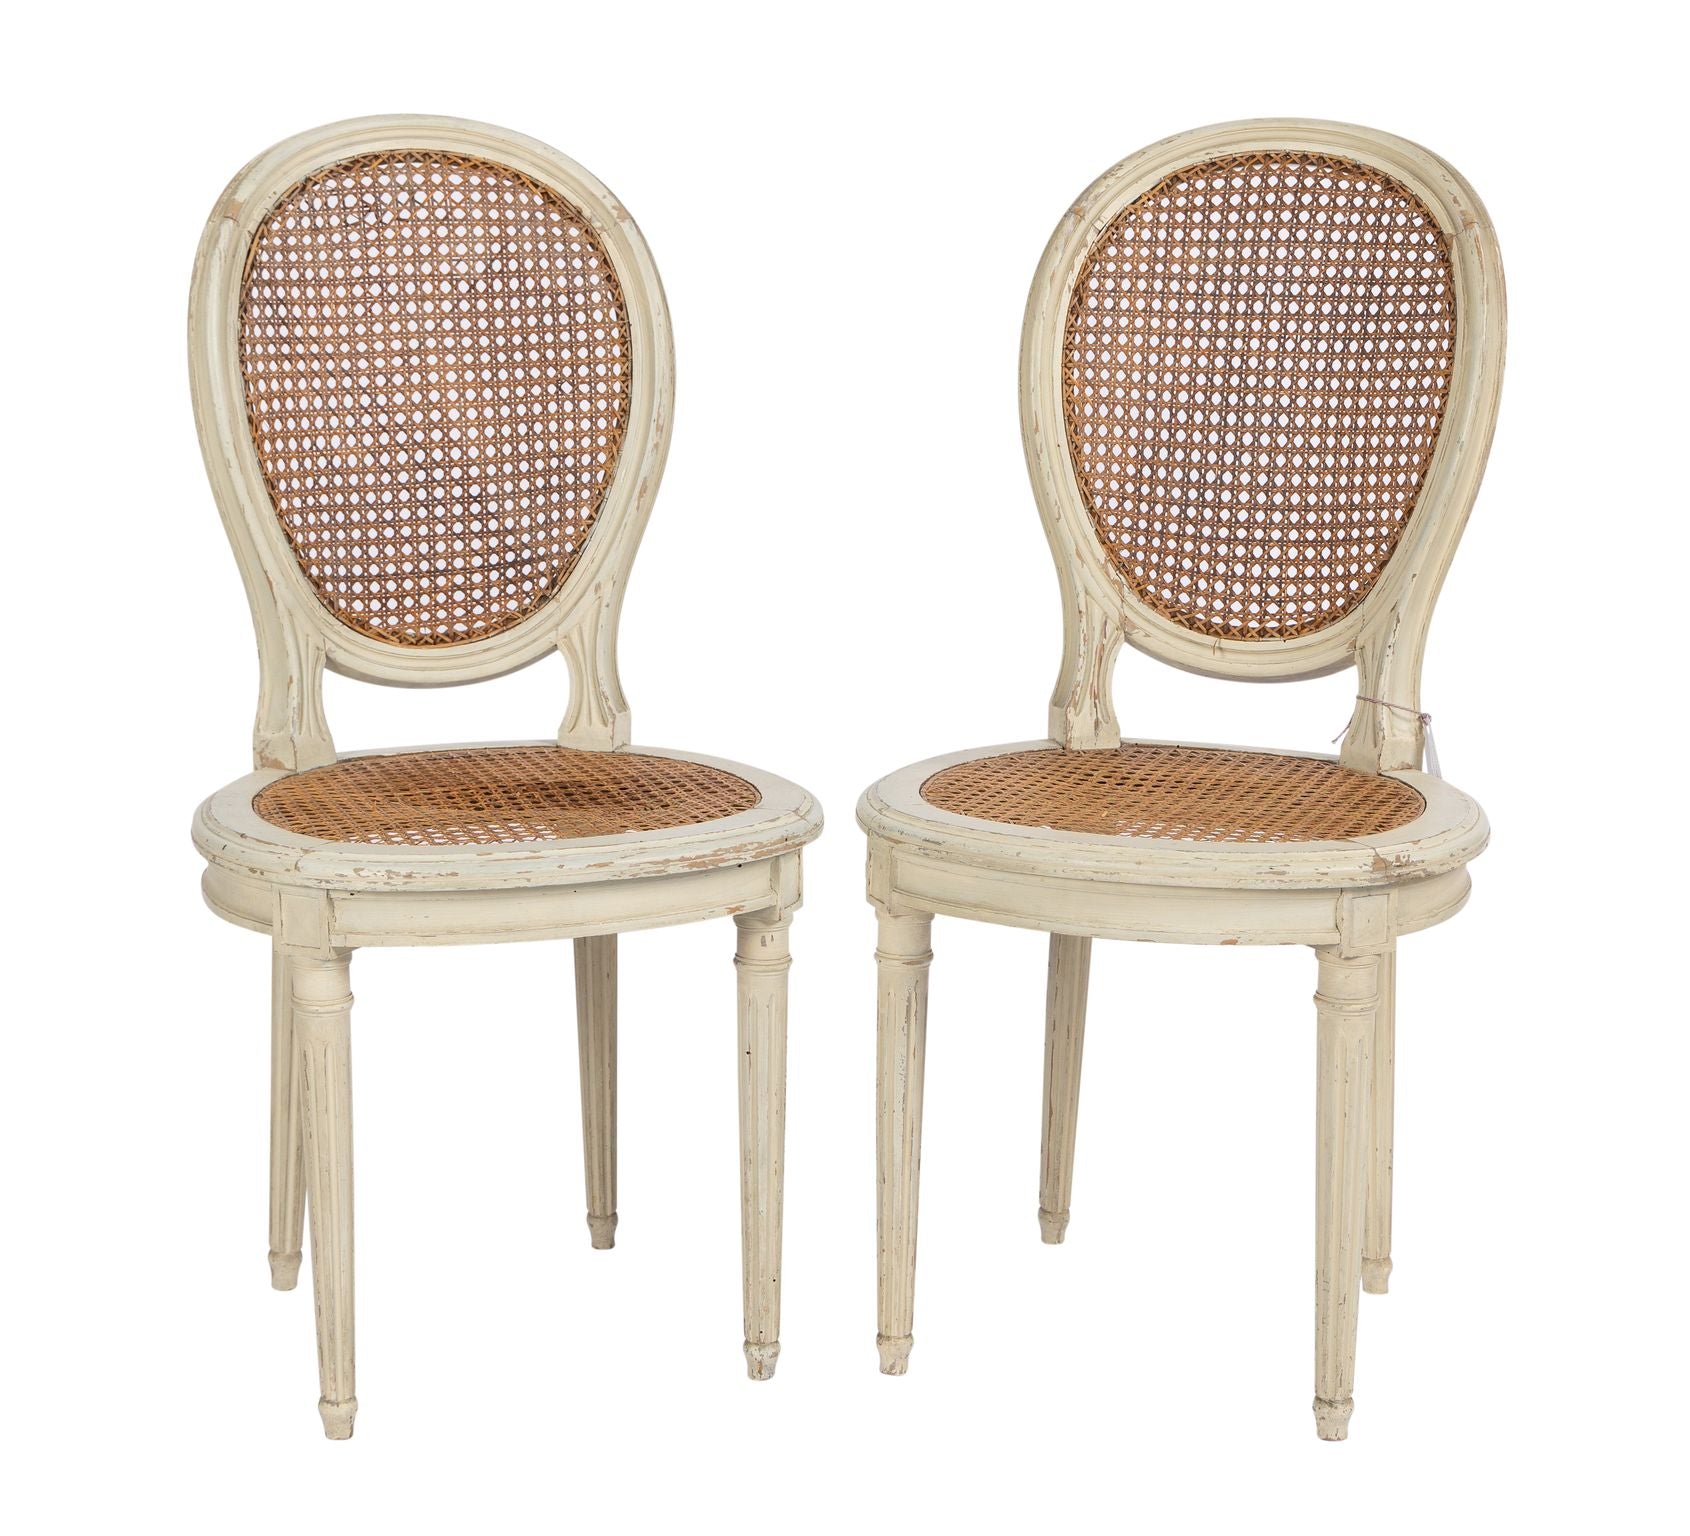 Antique French Louis XVI chairs from Aix en Provence